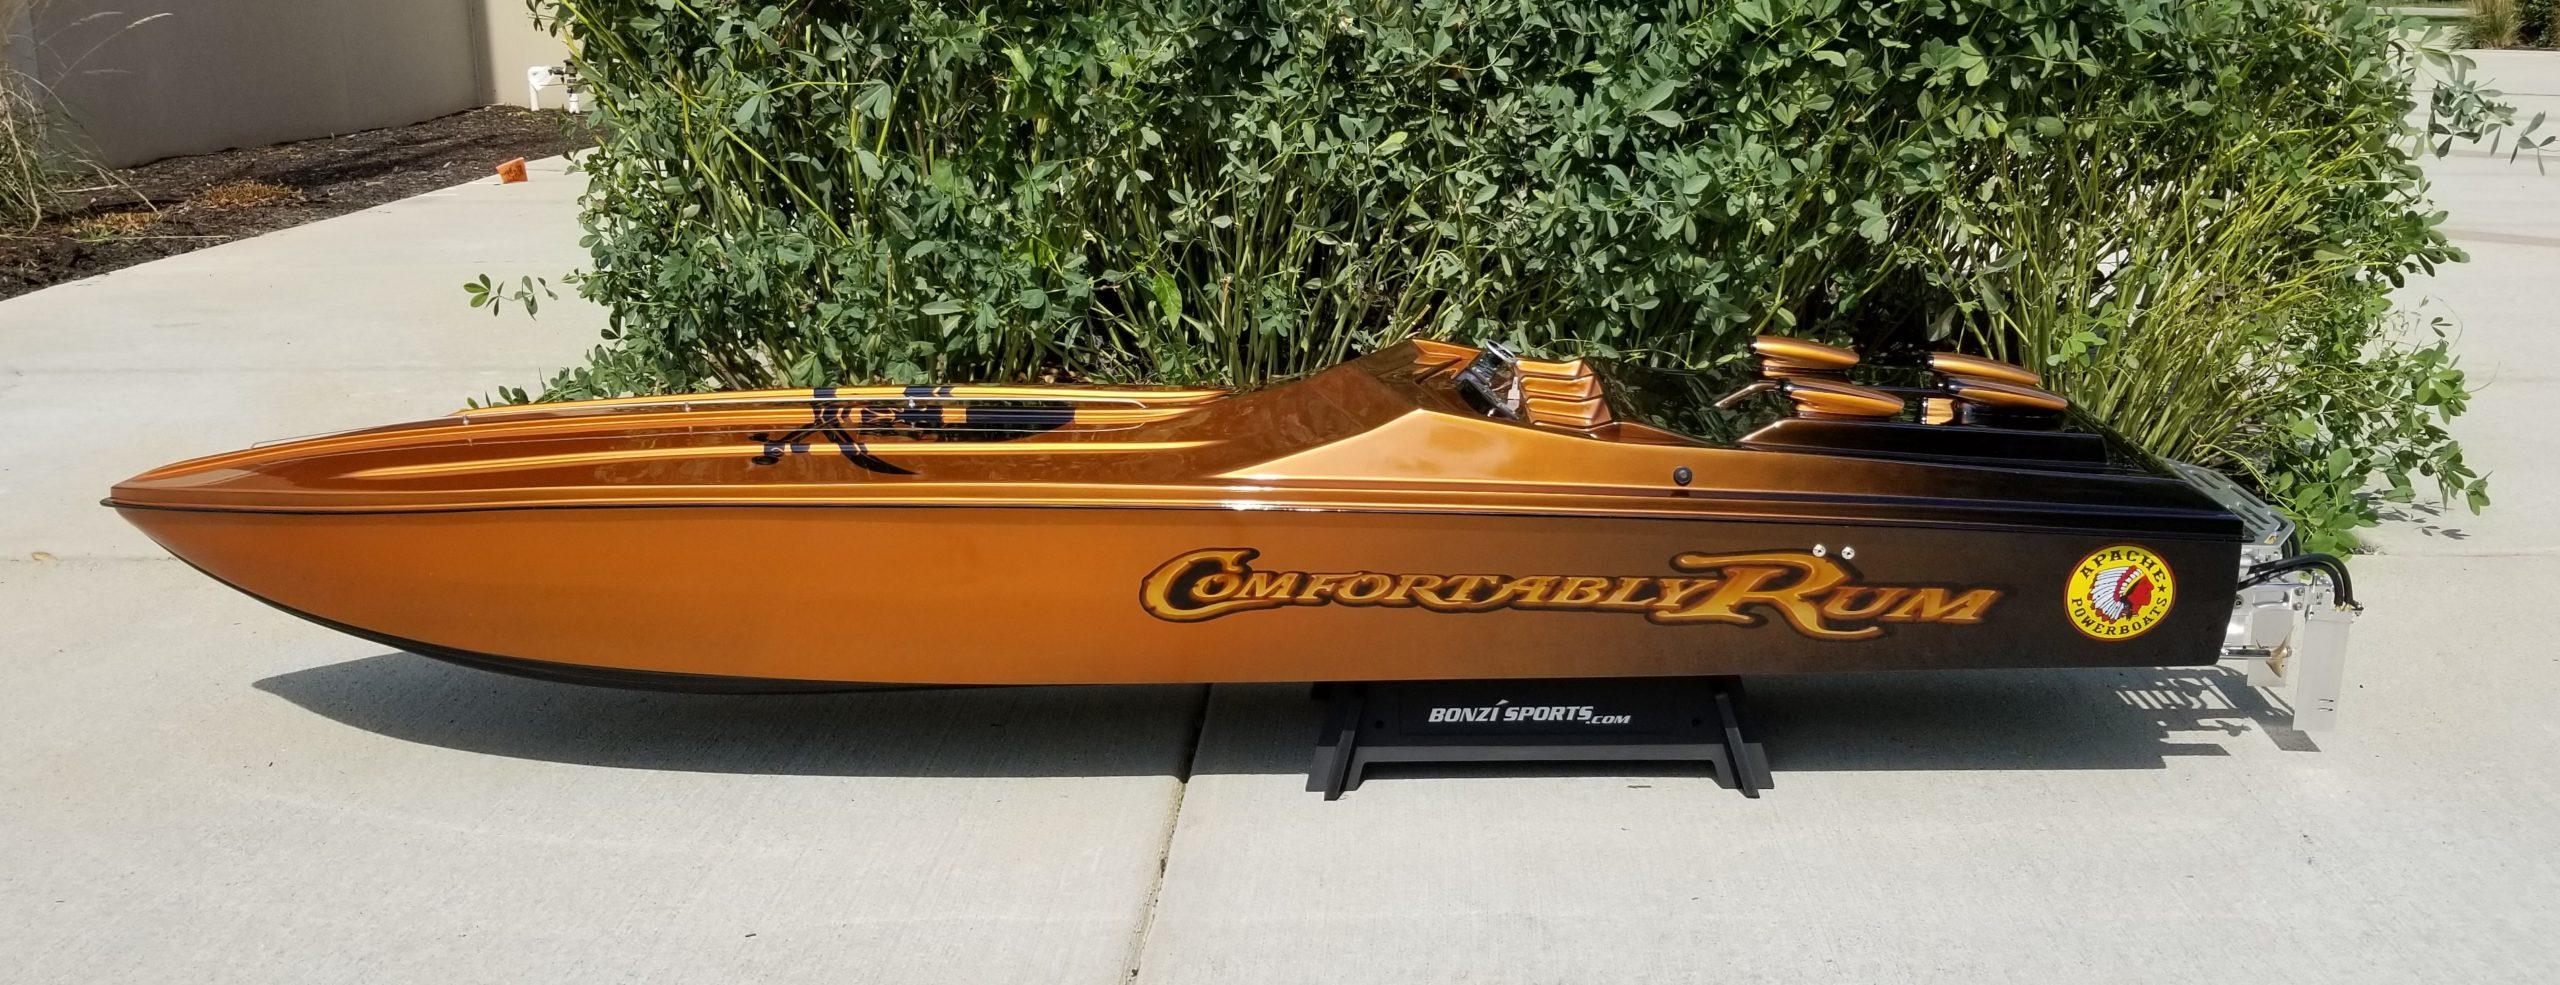 2 Stroke Rc Boats For Sale: Maintain and upgrade your 2-stroke RC boat for peak performance.